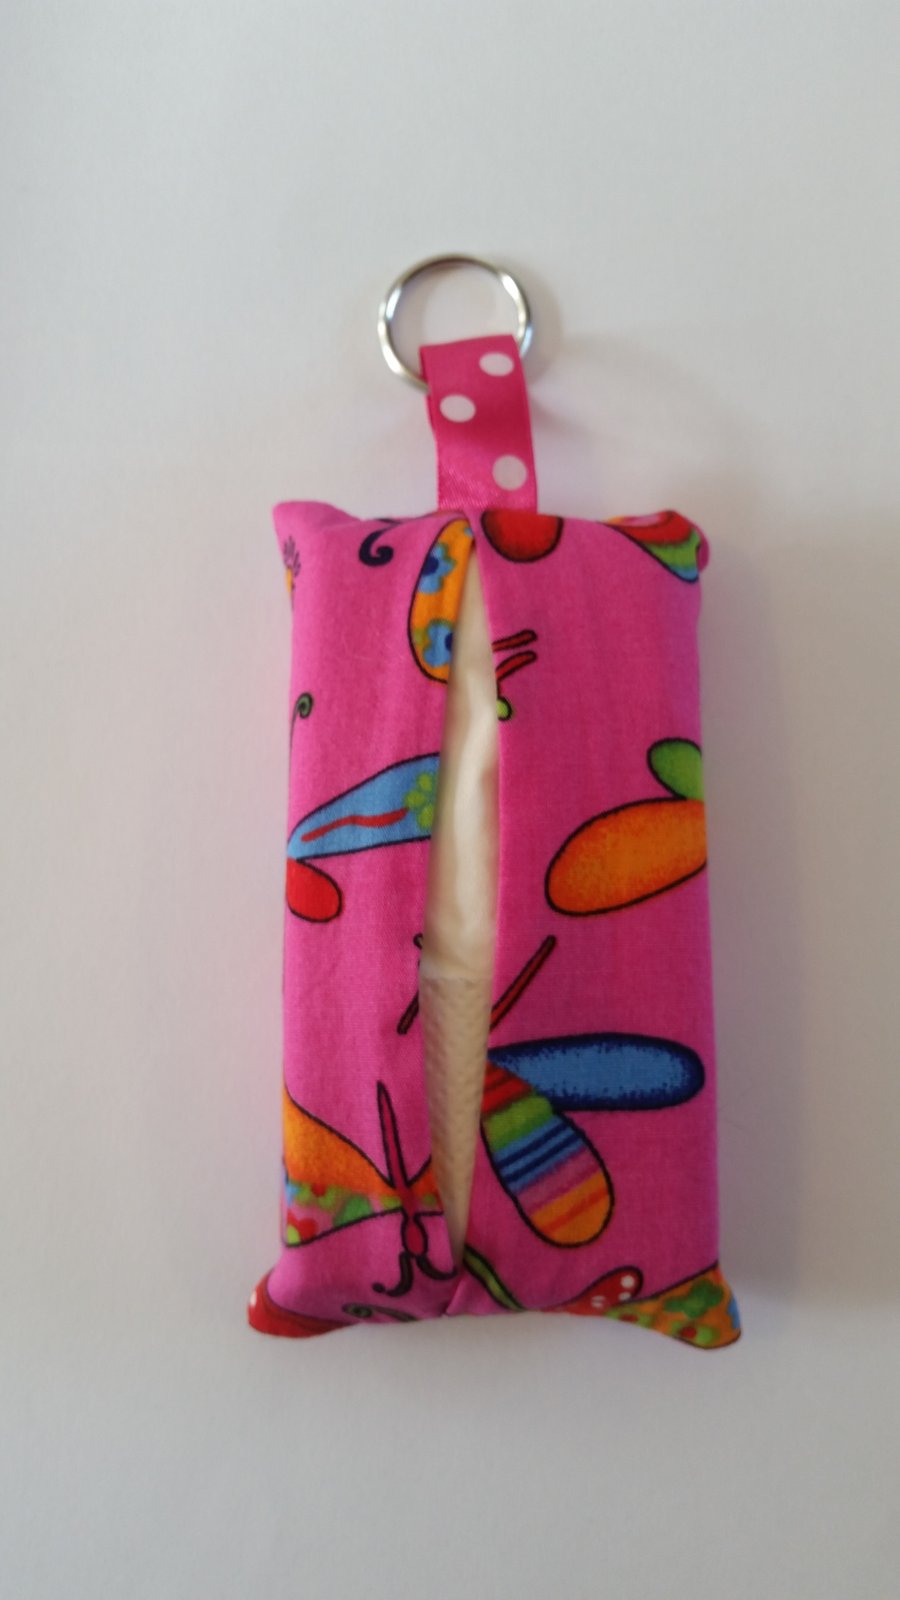 SALE Tissue holder keyring in pink butterfly fabric. 